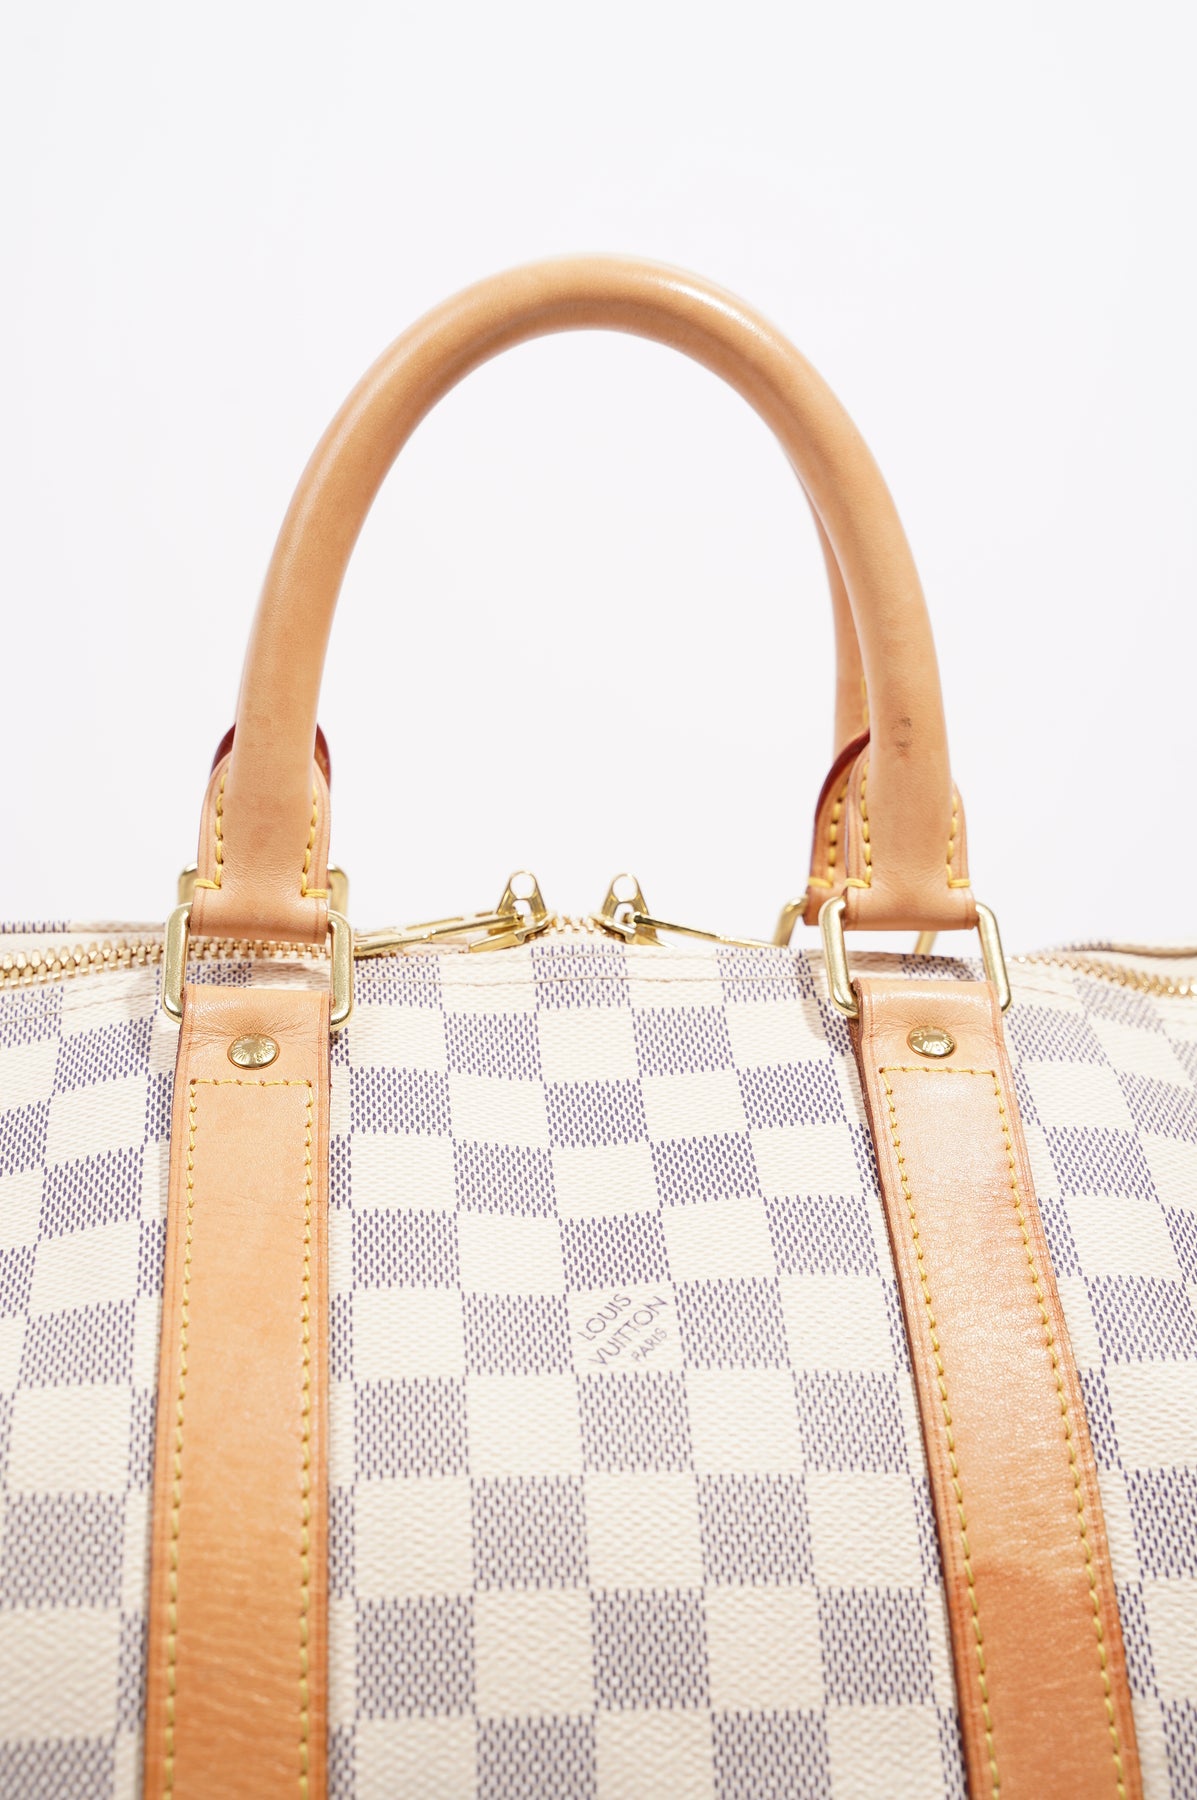 Louis Vuitton keepall 45 in damier azur – Lady Clara's Collection